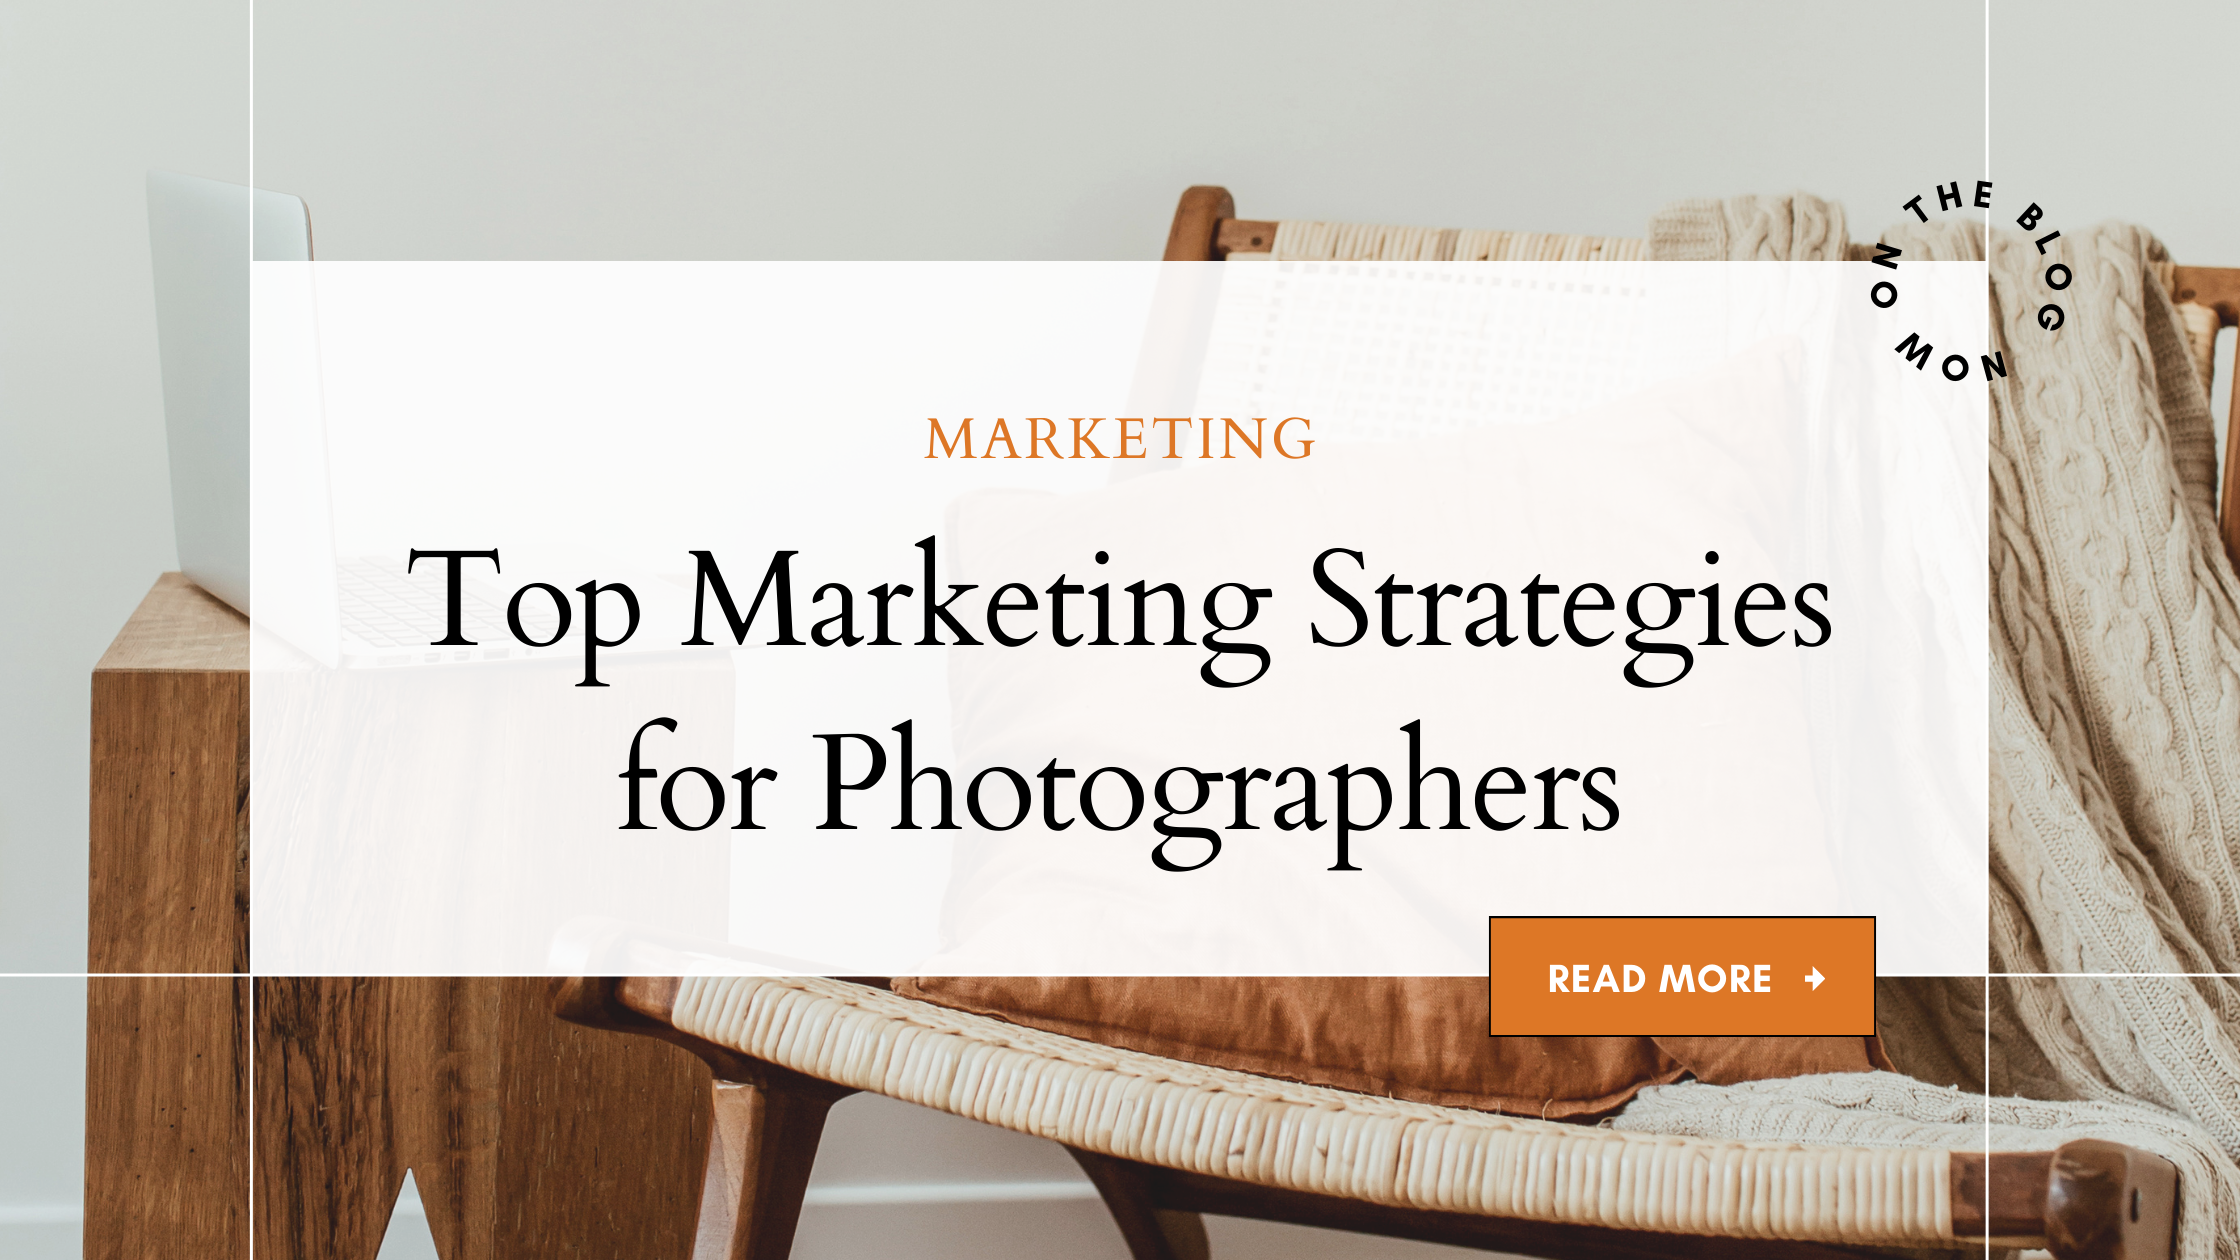 Marketing Trends for Photographers